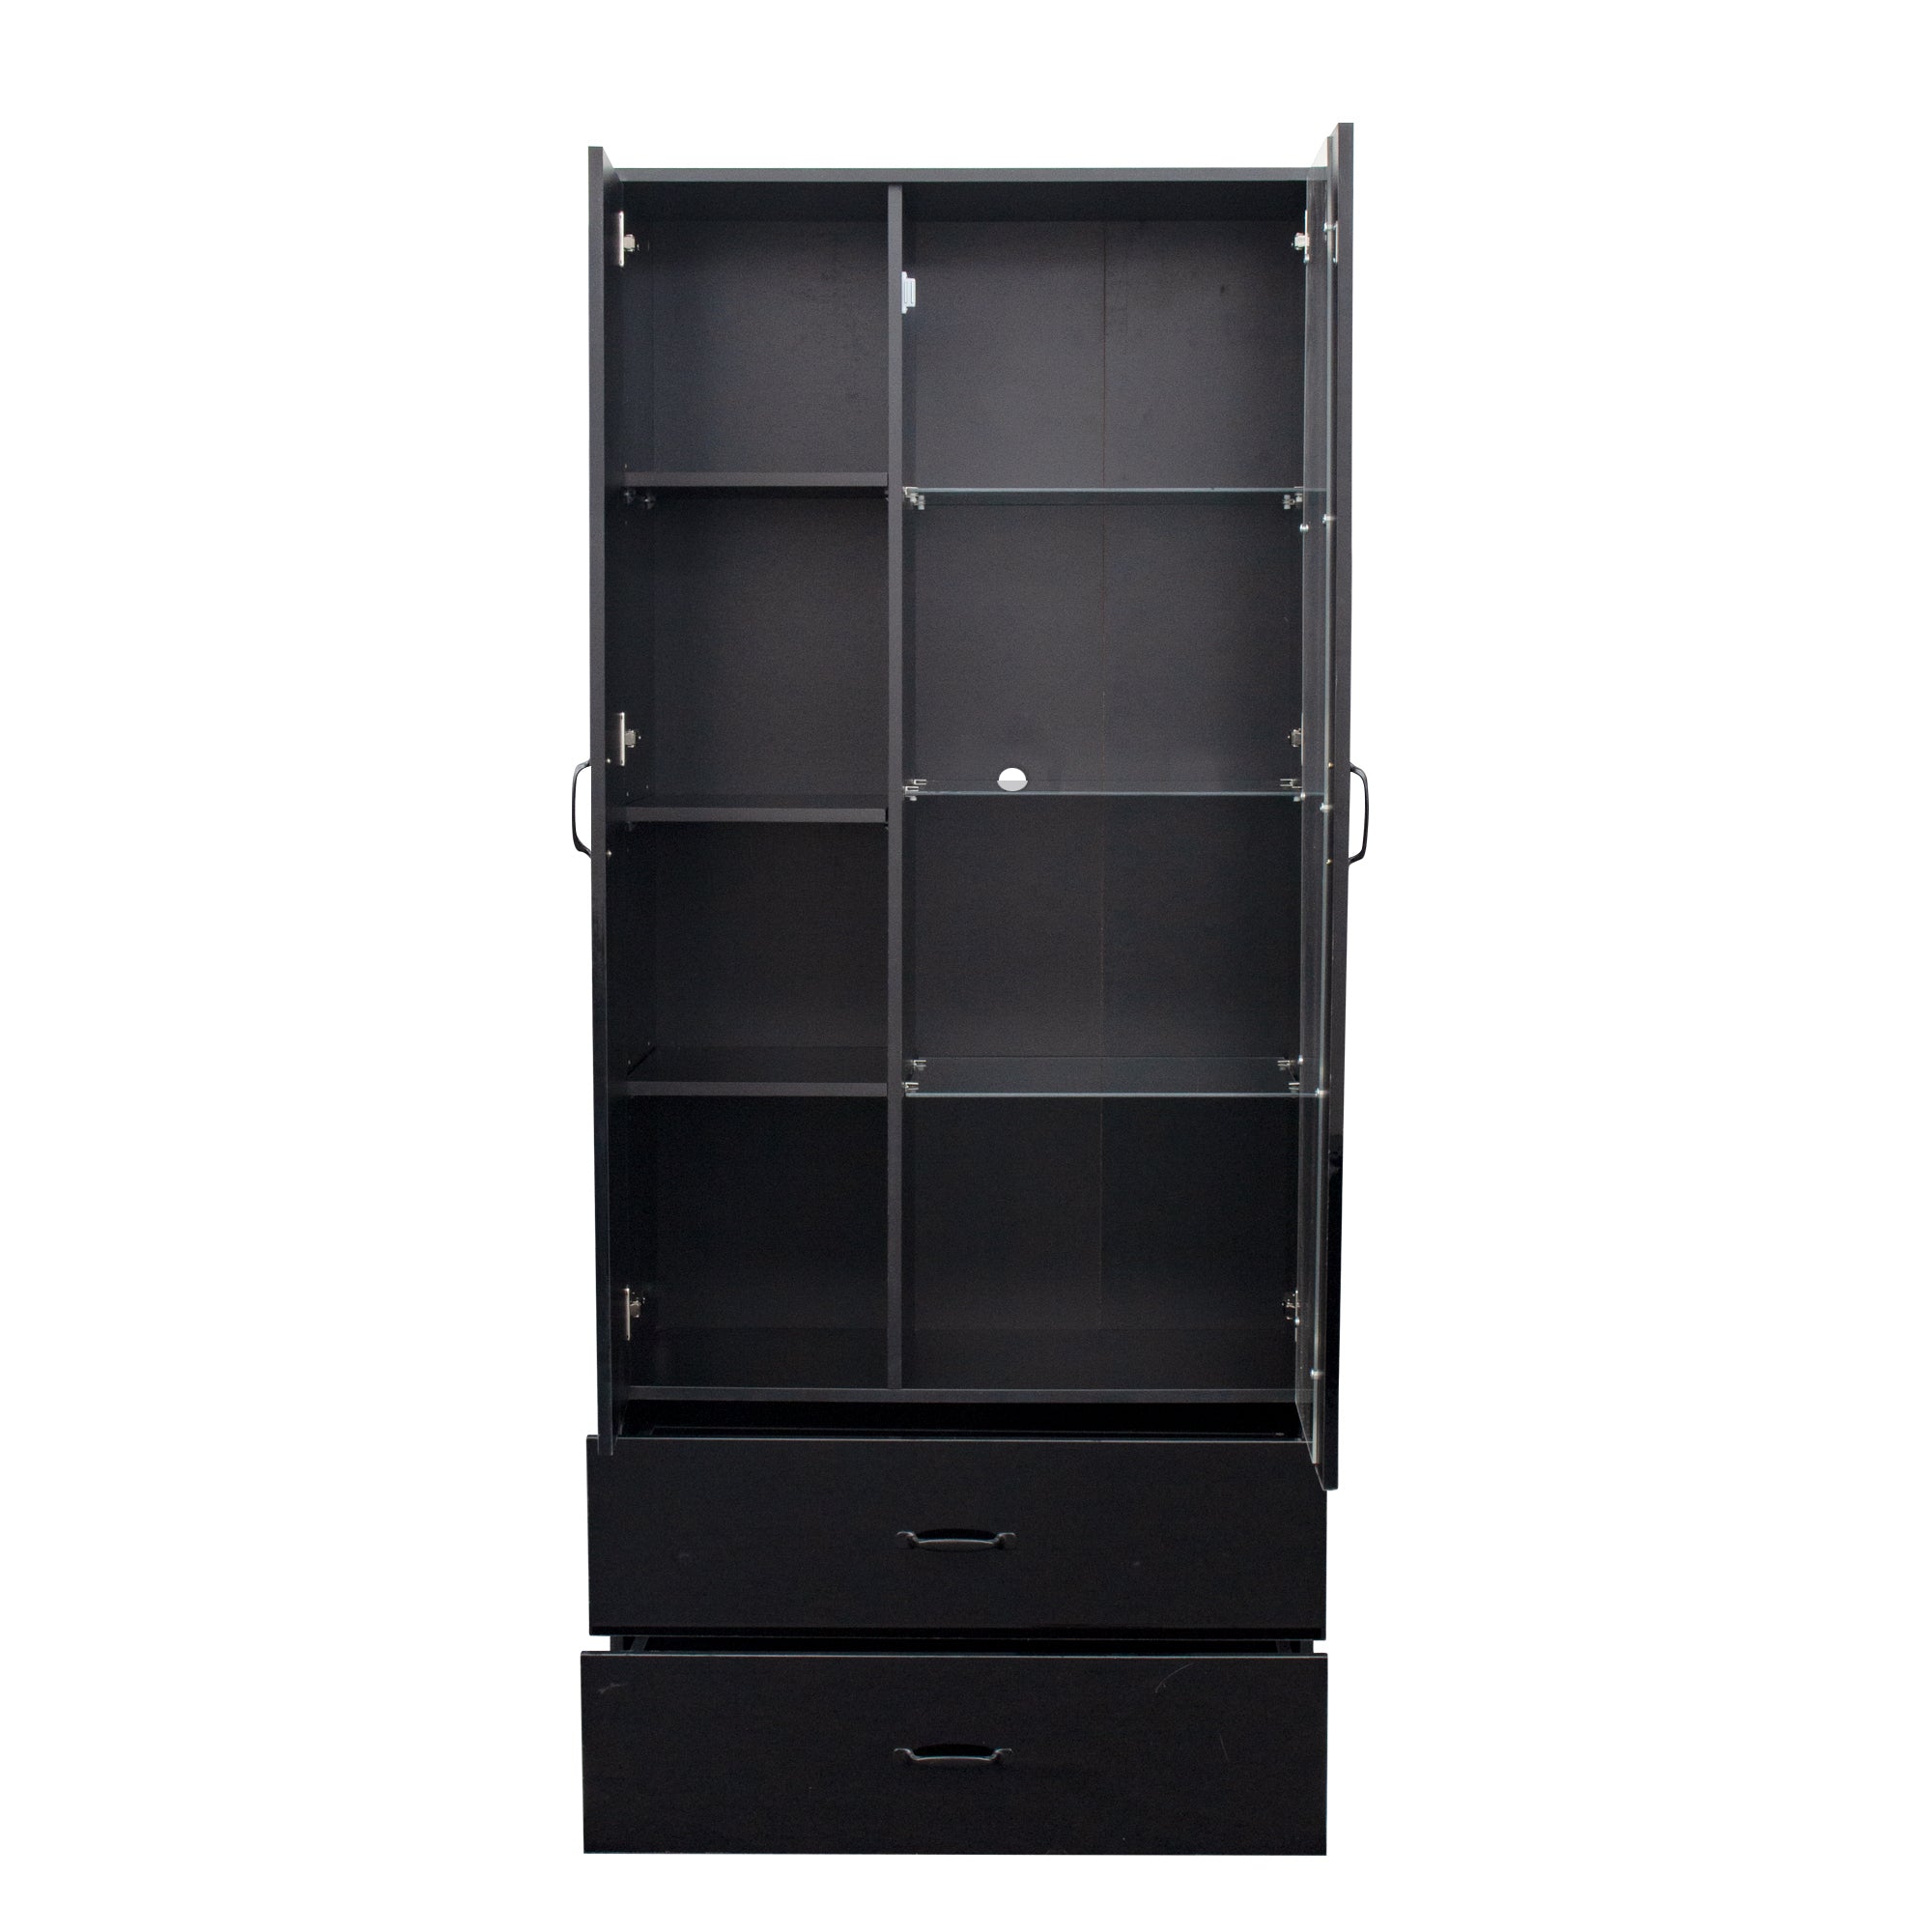 Sideboard with Shelves and Drawers (Black)